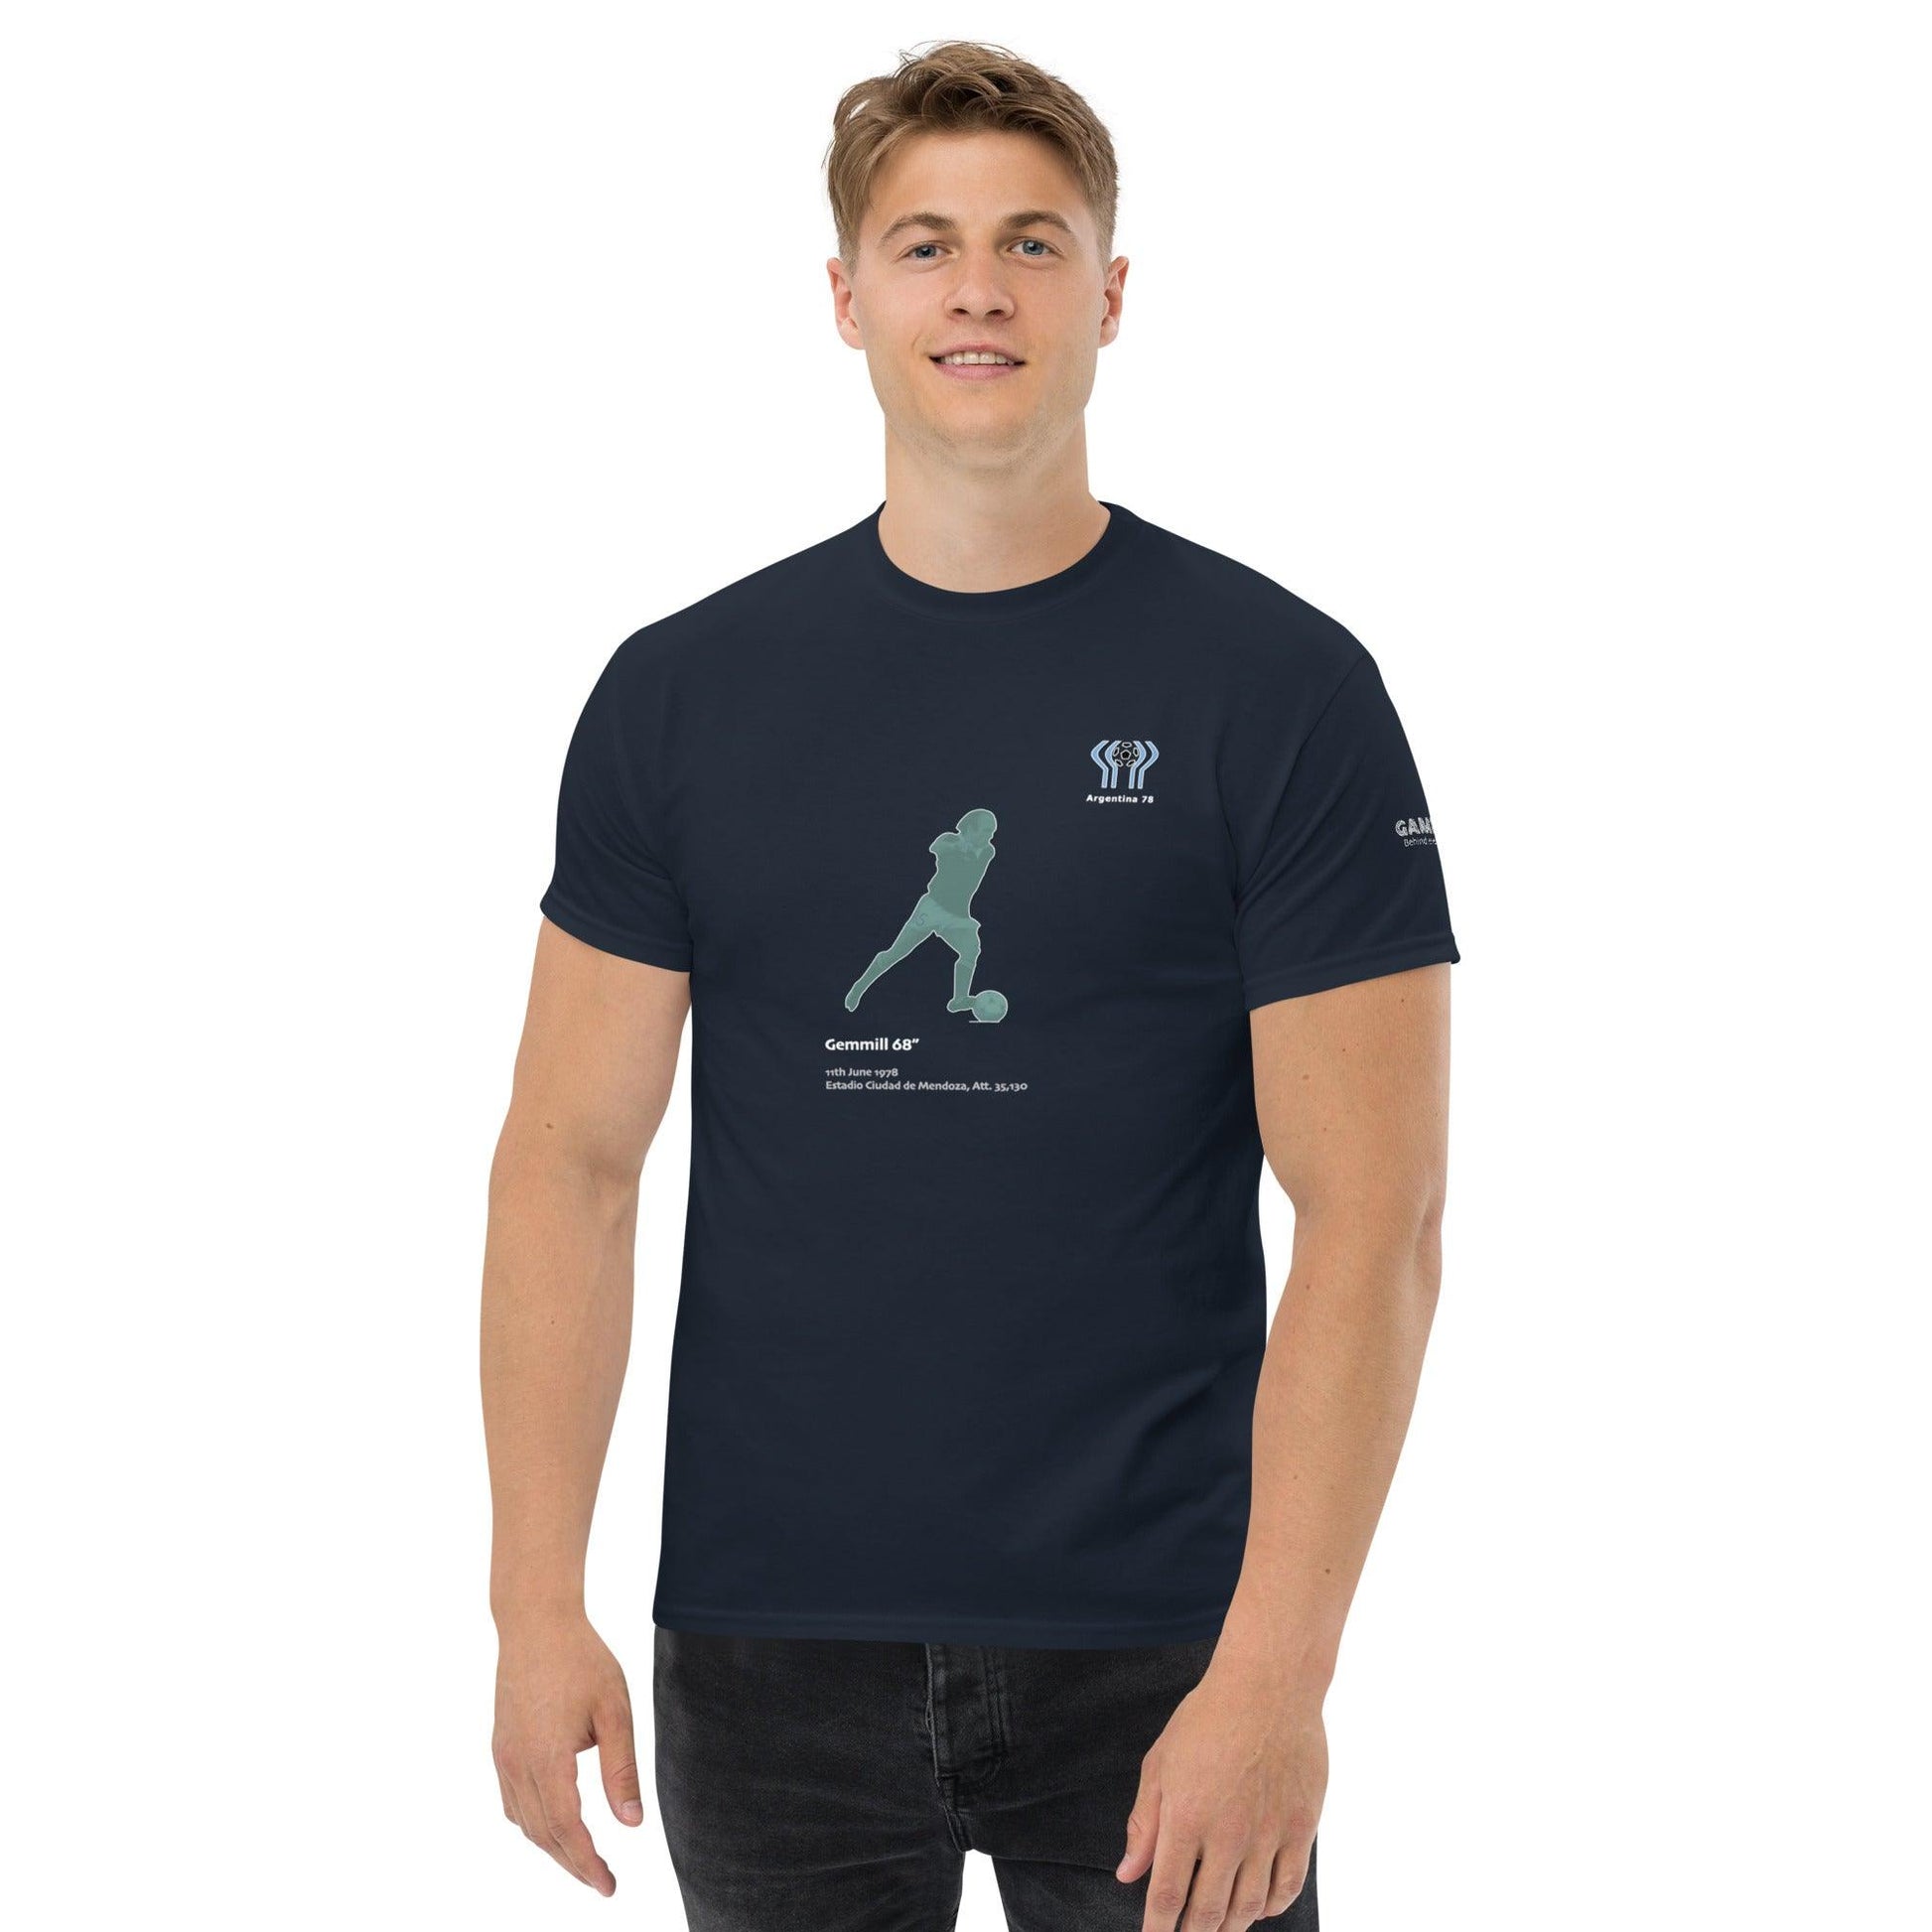 Archie Gemmill 1978 World Cup T-shirt by Game Yarns